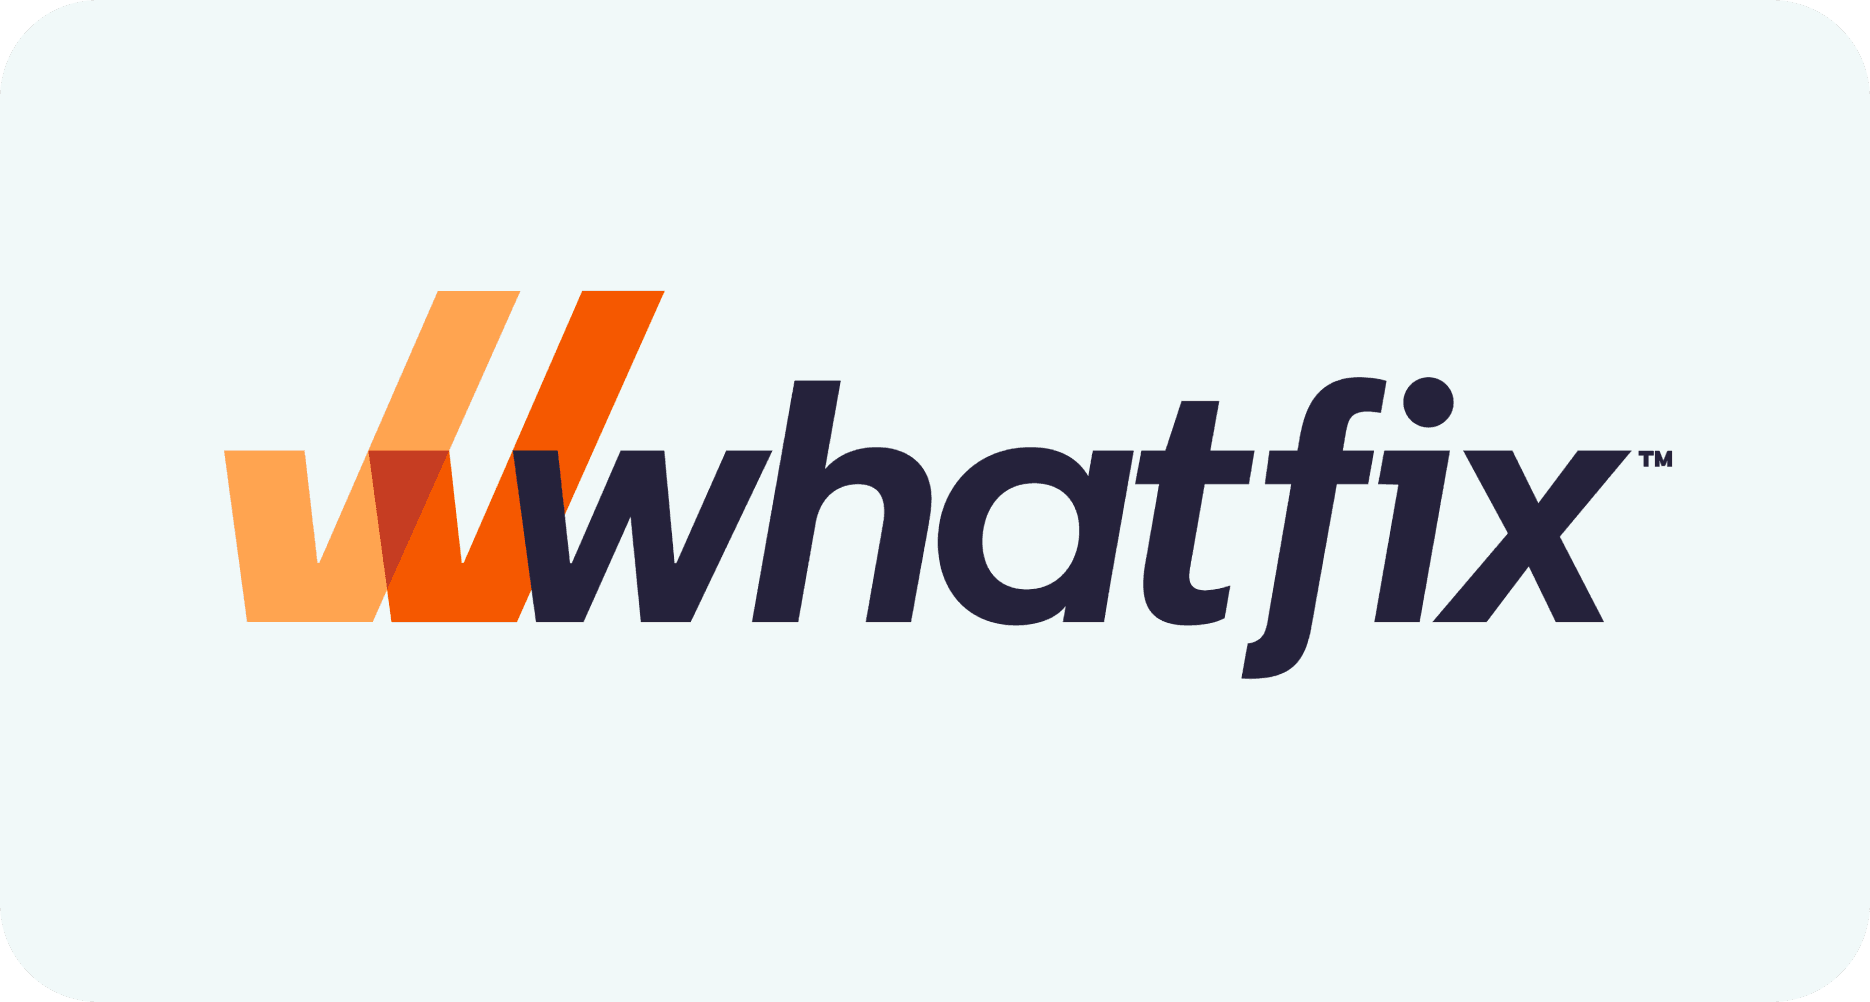 Whatfix Logo as an app that features adaptive learning